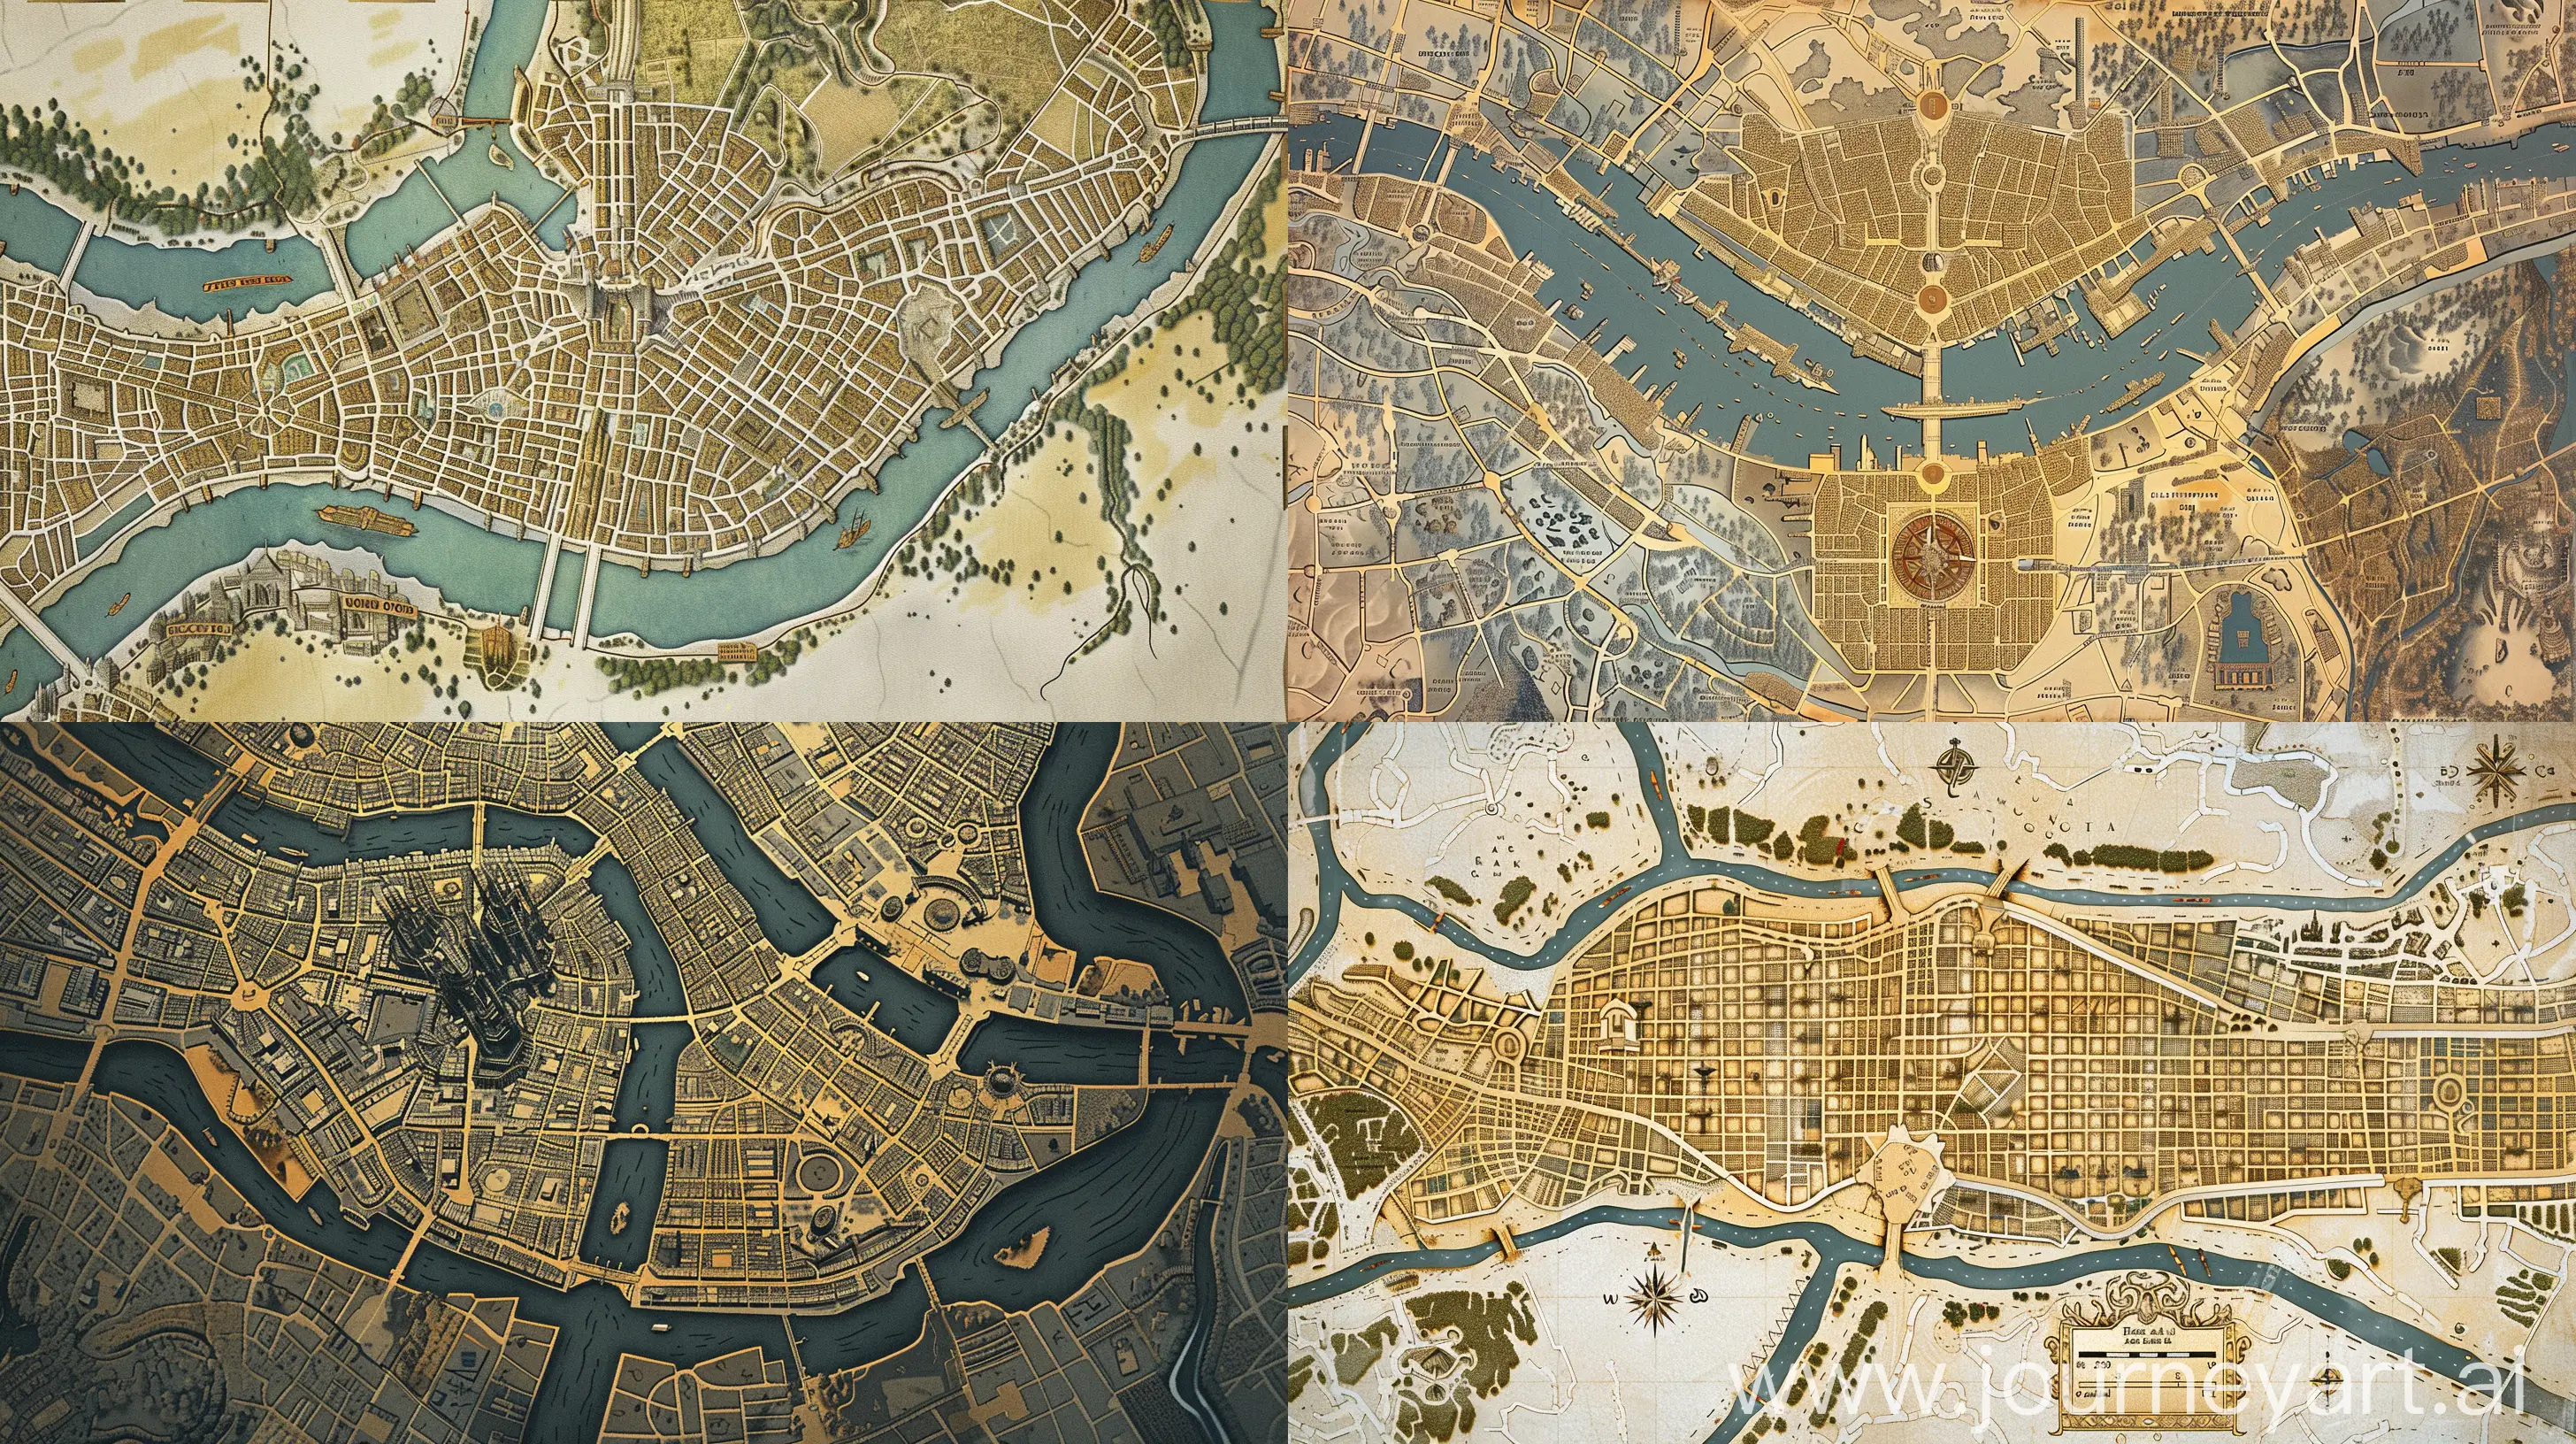 a map of the capital for playing D&D in the middle of the city there is a river dividing it into two parts:: blueprint::1 ancient::1 bulblighting::1 rivera::1 banksy::1 caravaggio::1 rembrandt::1 beige::1 gold::3 gray::2 cardboard::3 --v 6 --ar 16:9